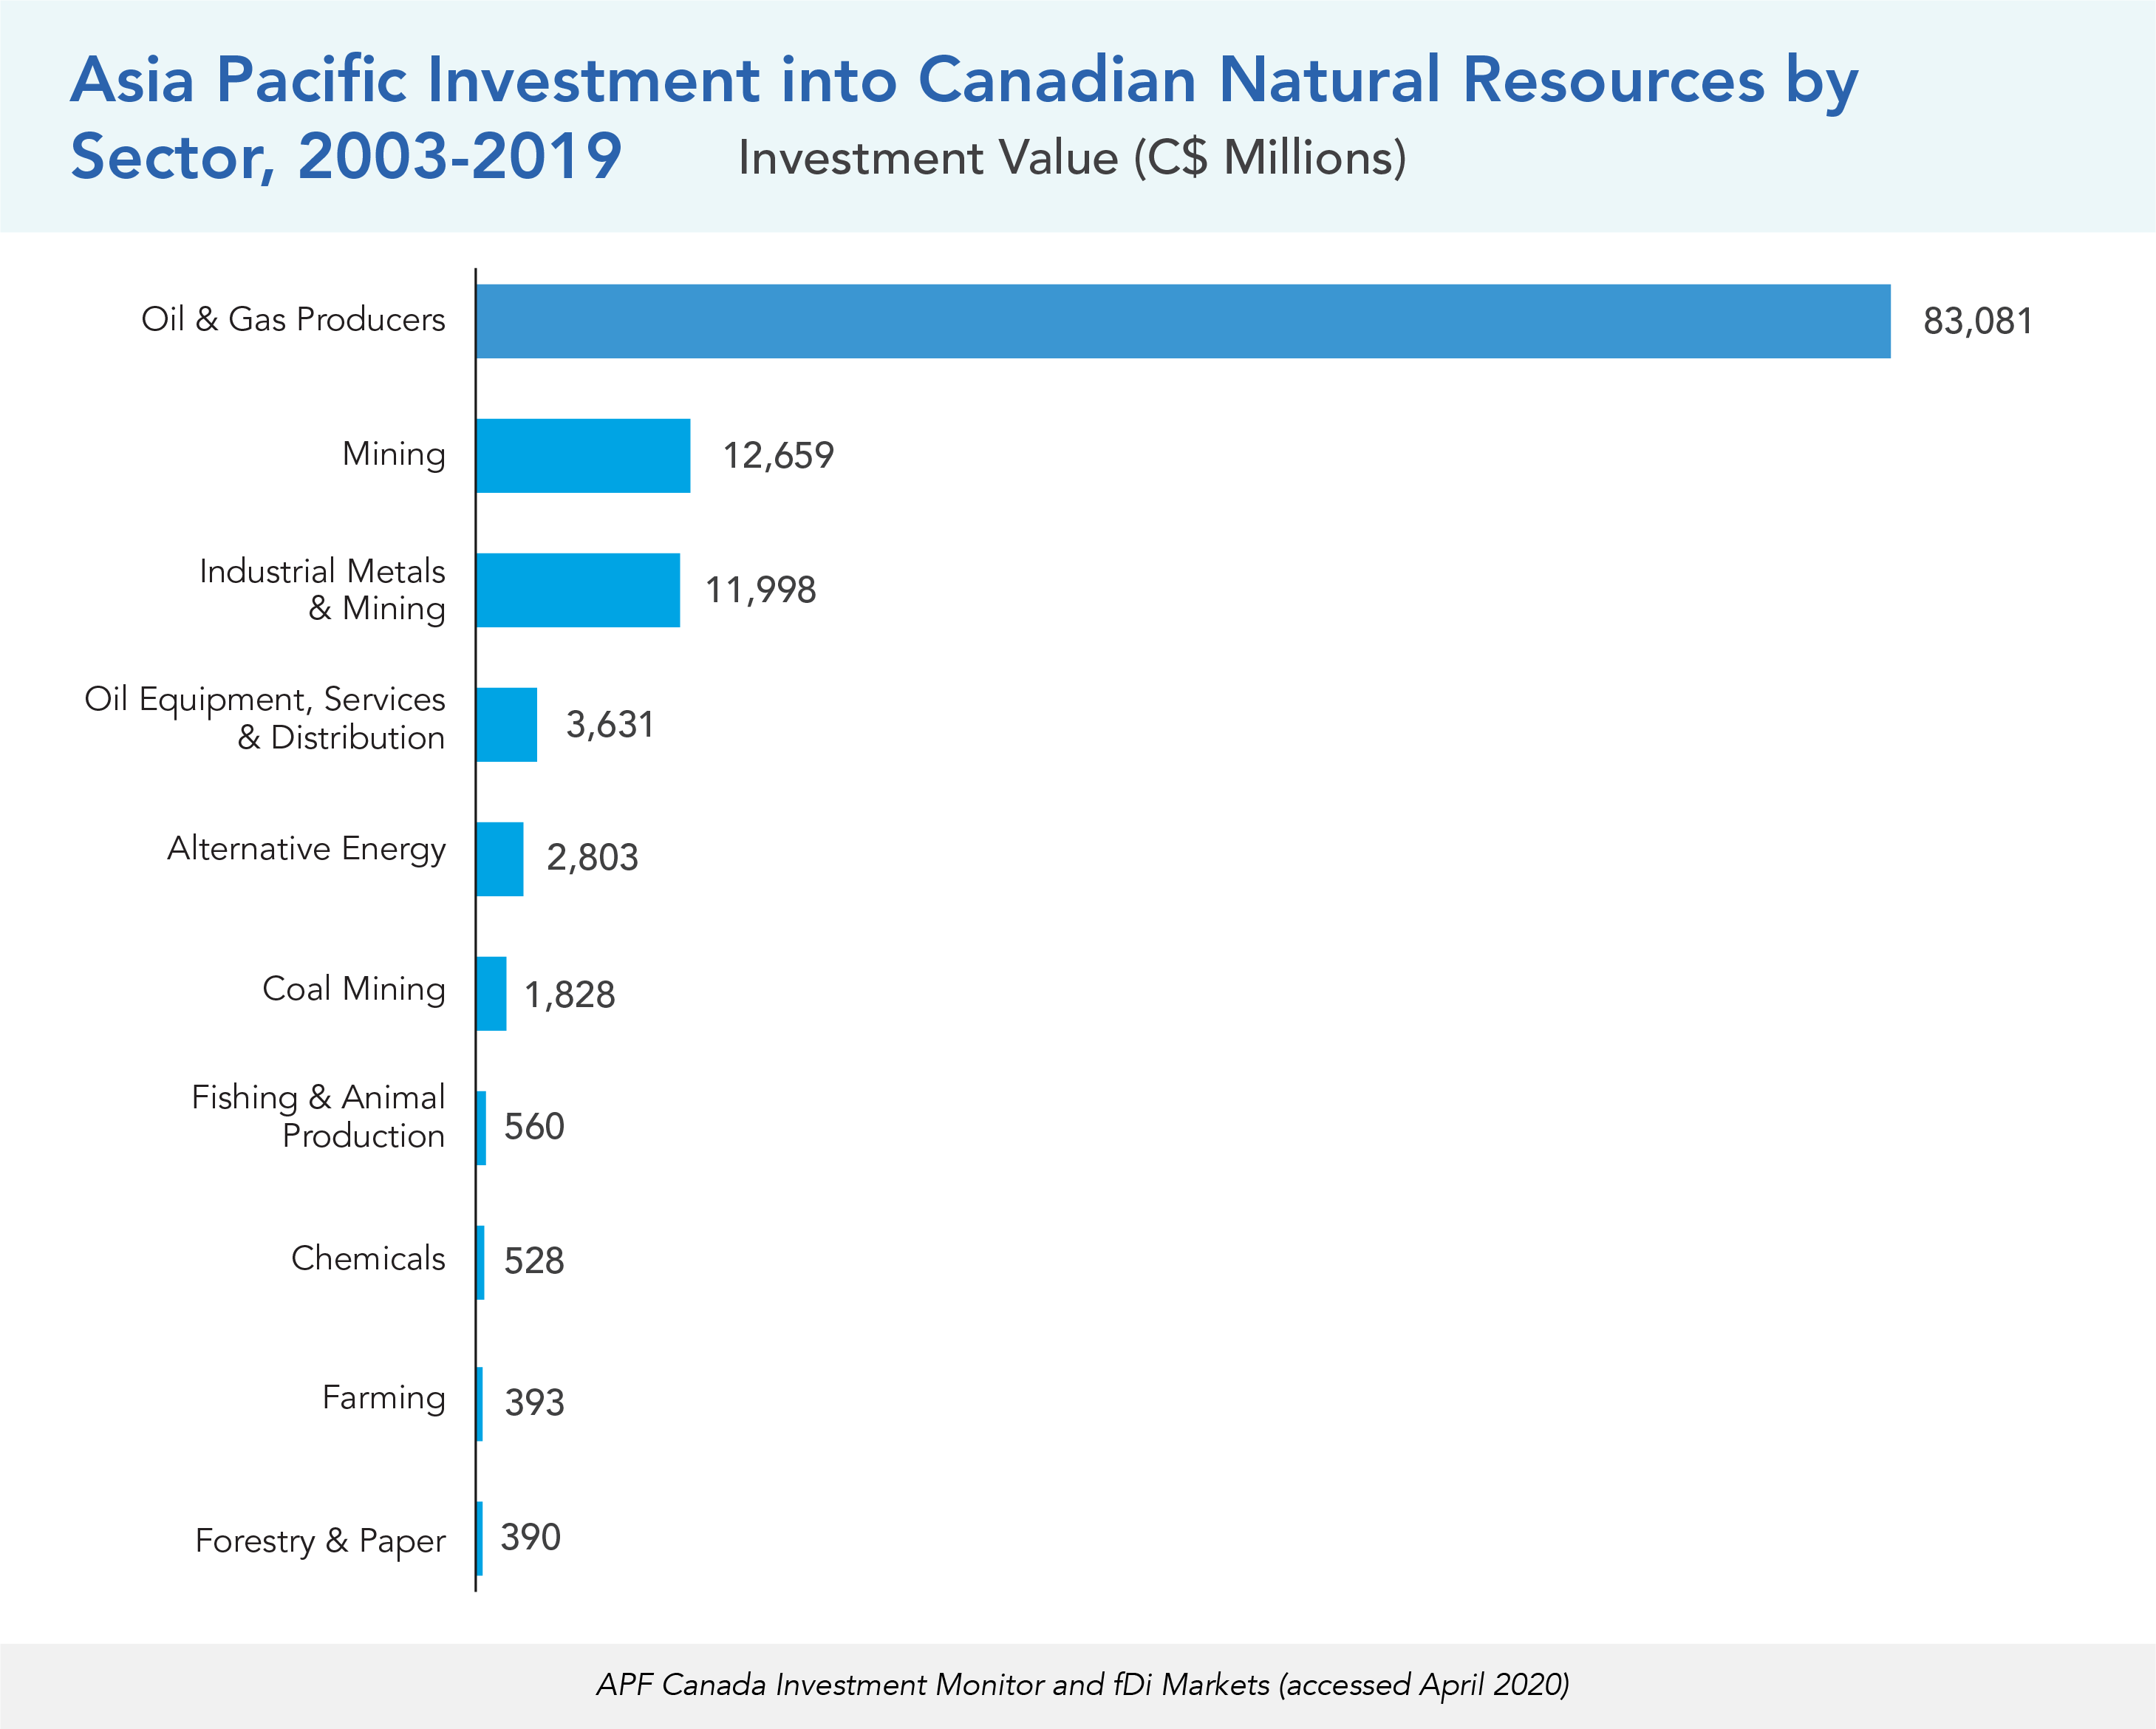 Asia Pacific Investment into Canadian Natural Resources by Sector, 2003-2019